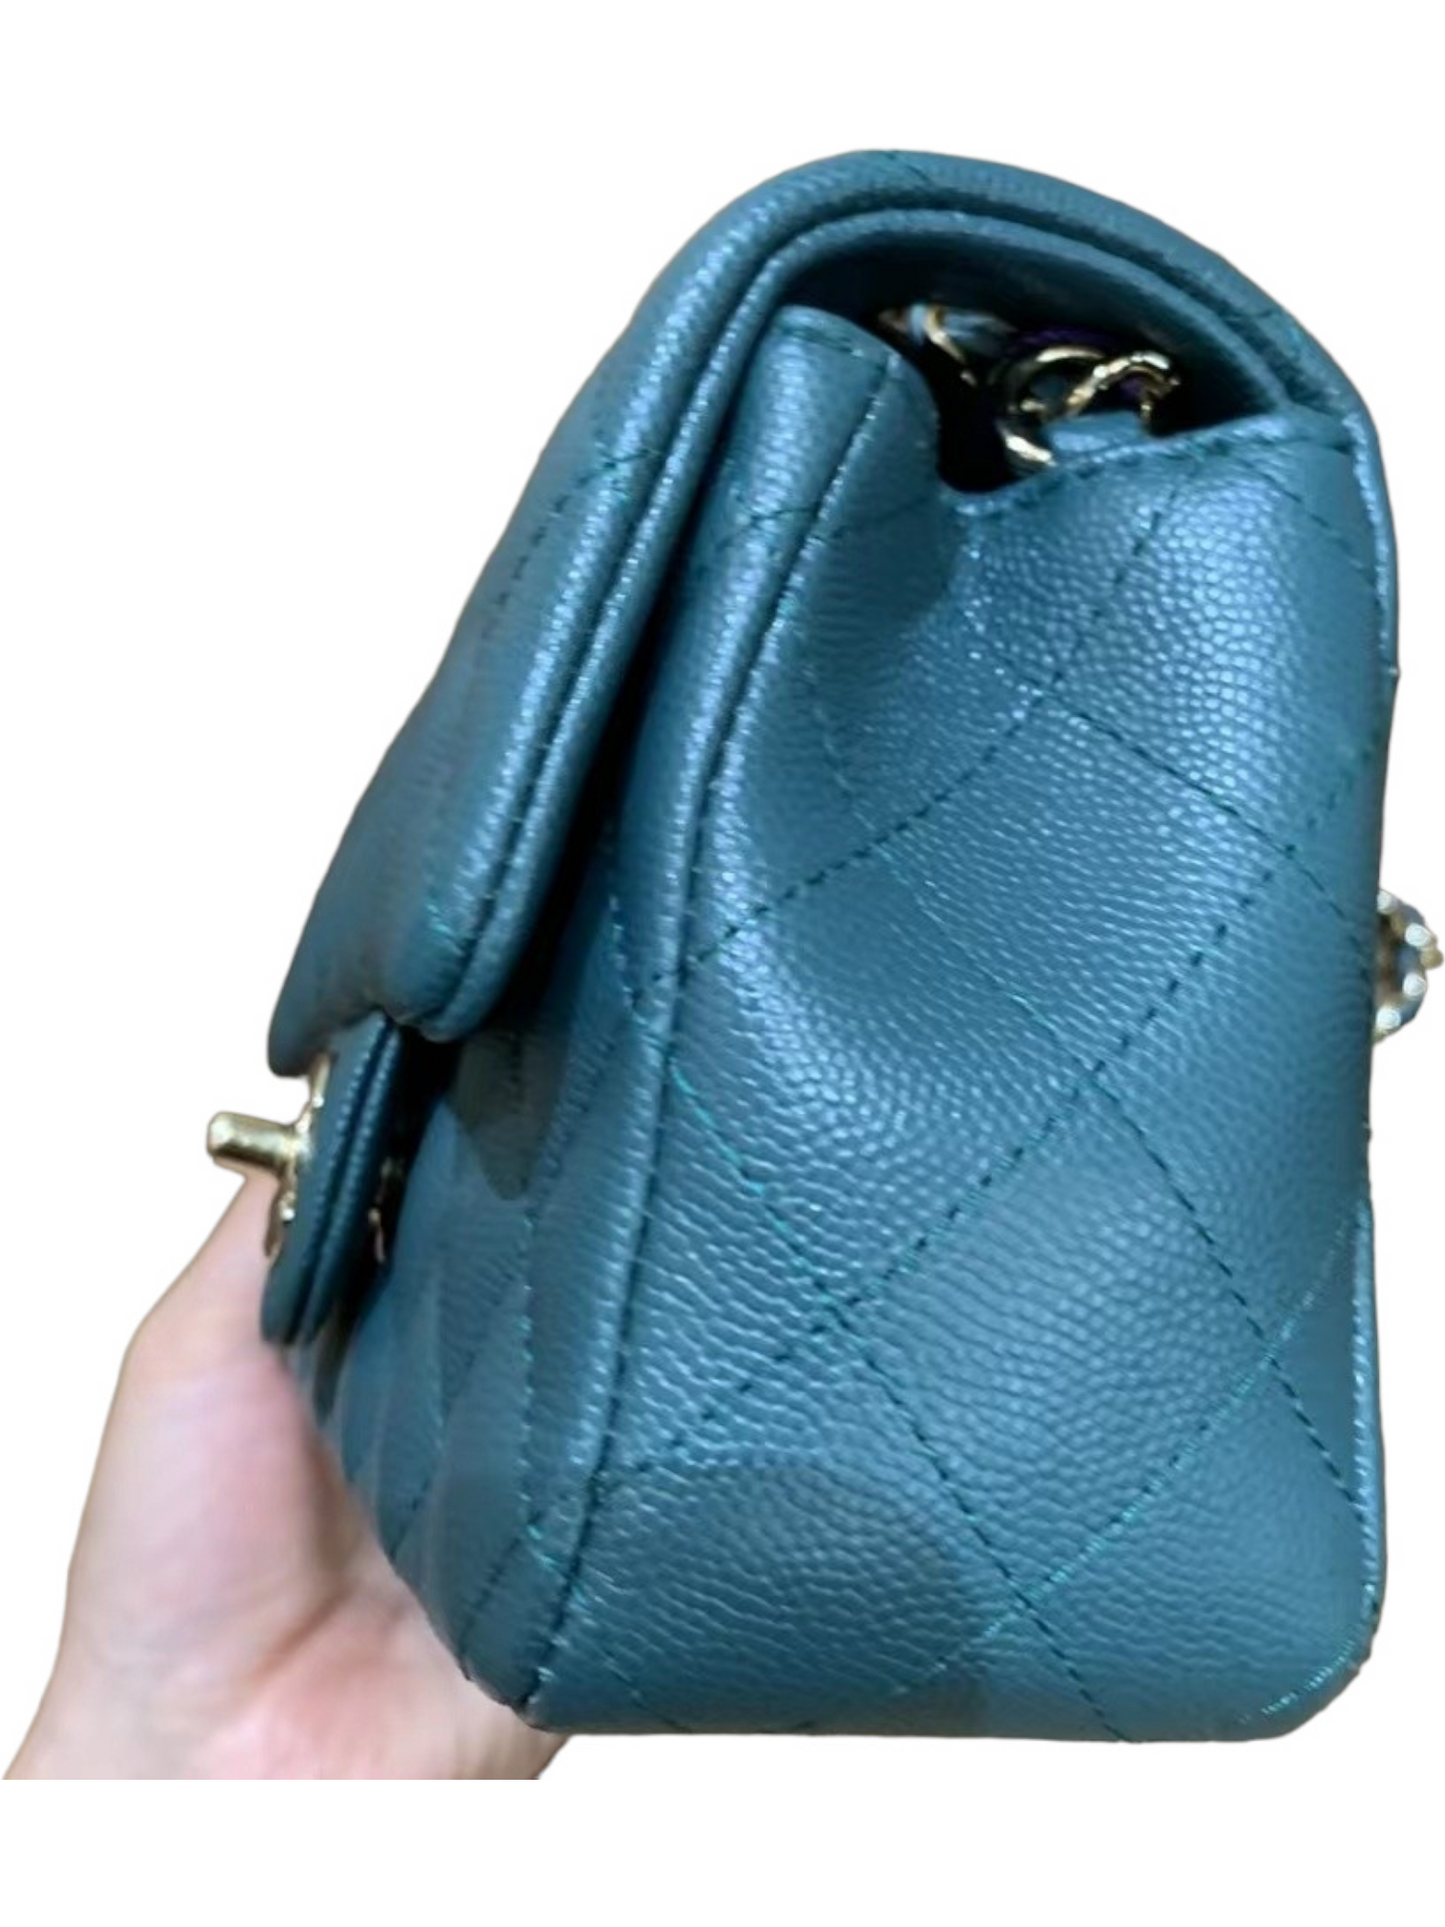 Chanel Mini Rectangle, 17B Dark Turquoise Green Caviar Leather with Shiny Gold Hardware